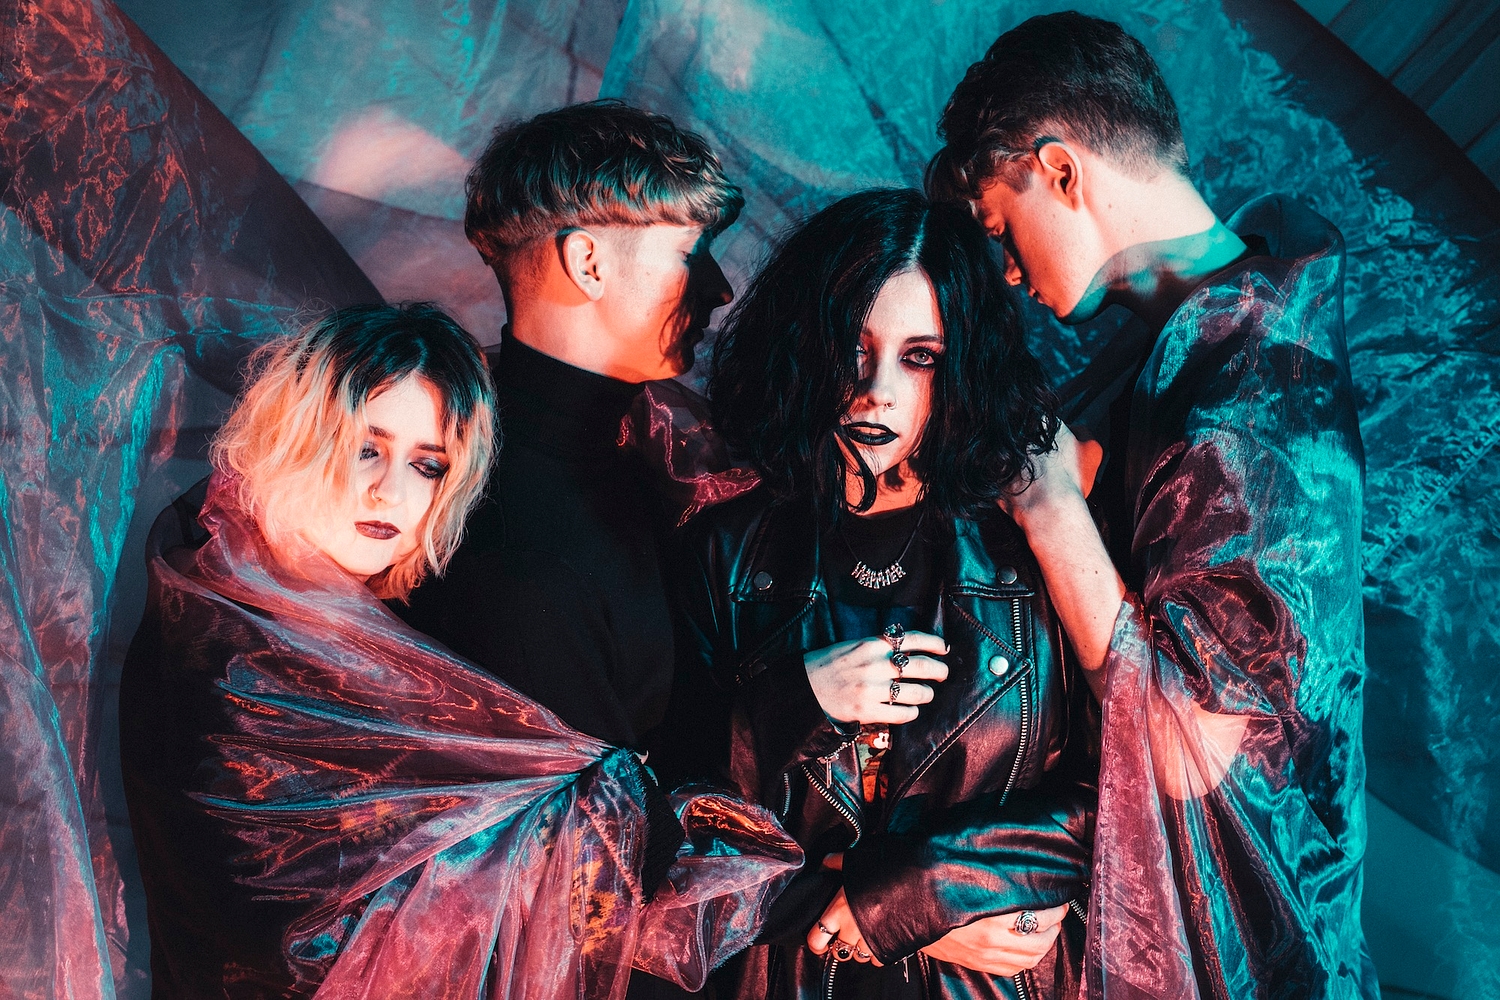 Pale Waves tease the release of their third album